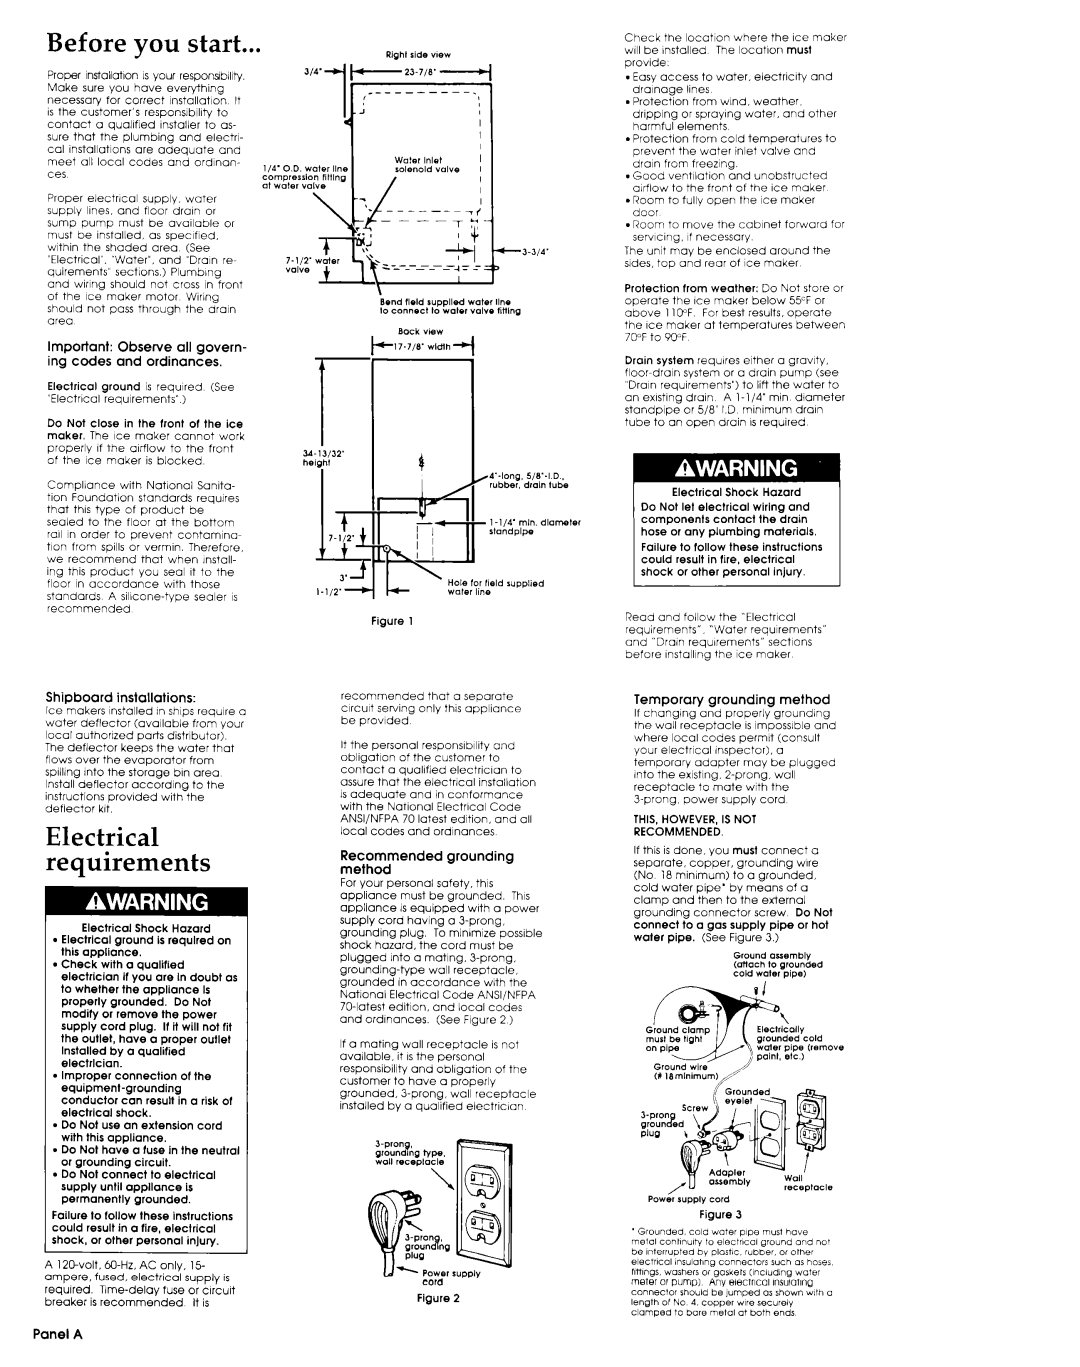 Whirlpool 759105-U manual Before you start, Electrical requirements, Shipboard installations, grounding, method, Panel A 